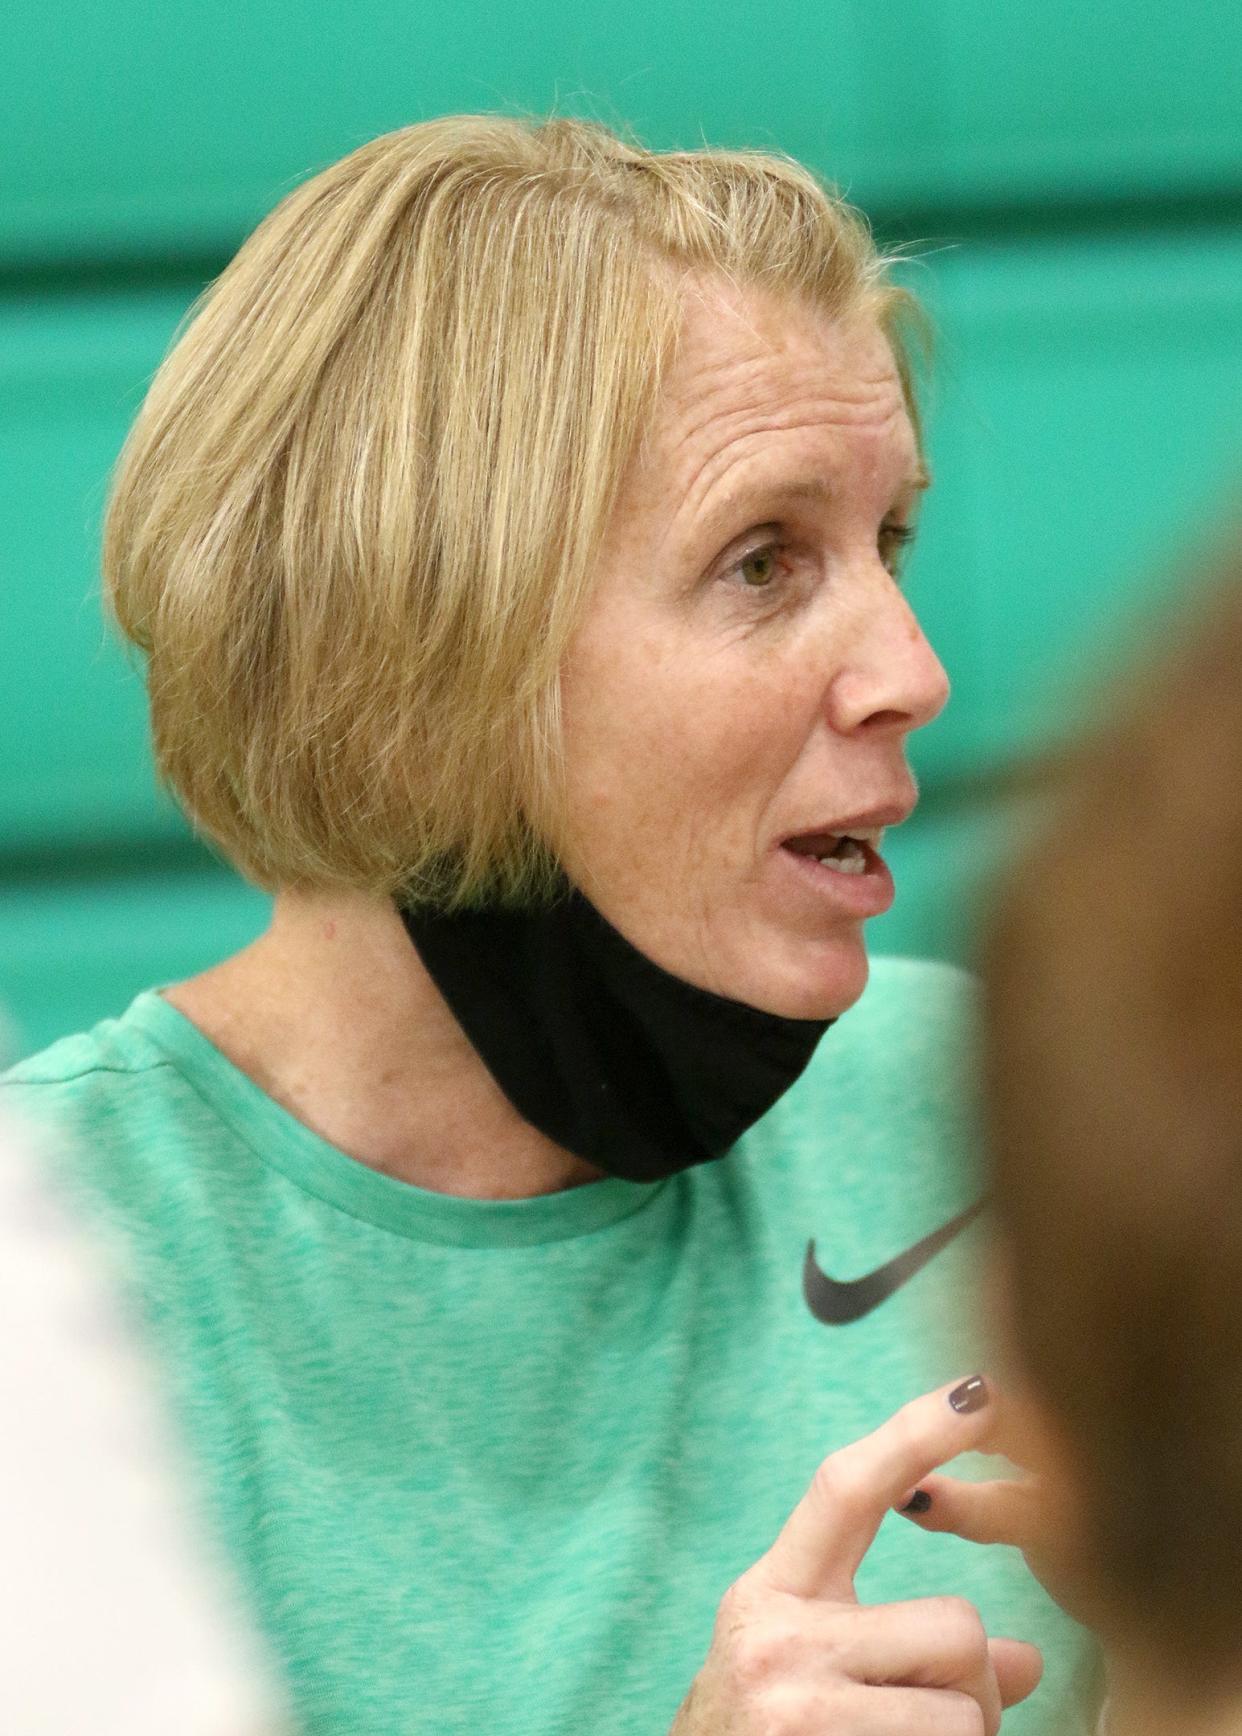 West Branch volleyball coach Penny DeShields talks to the team following their match against Massillon on Thursday, September 30, 2021.